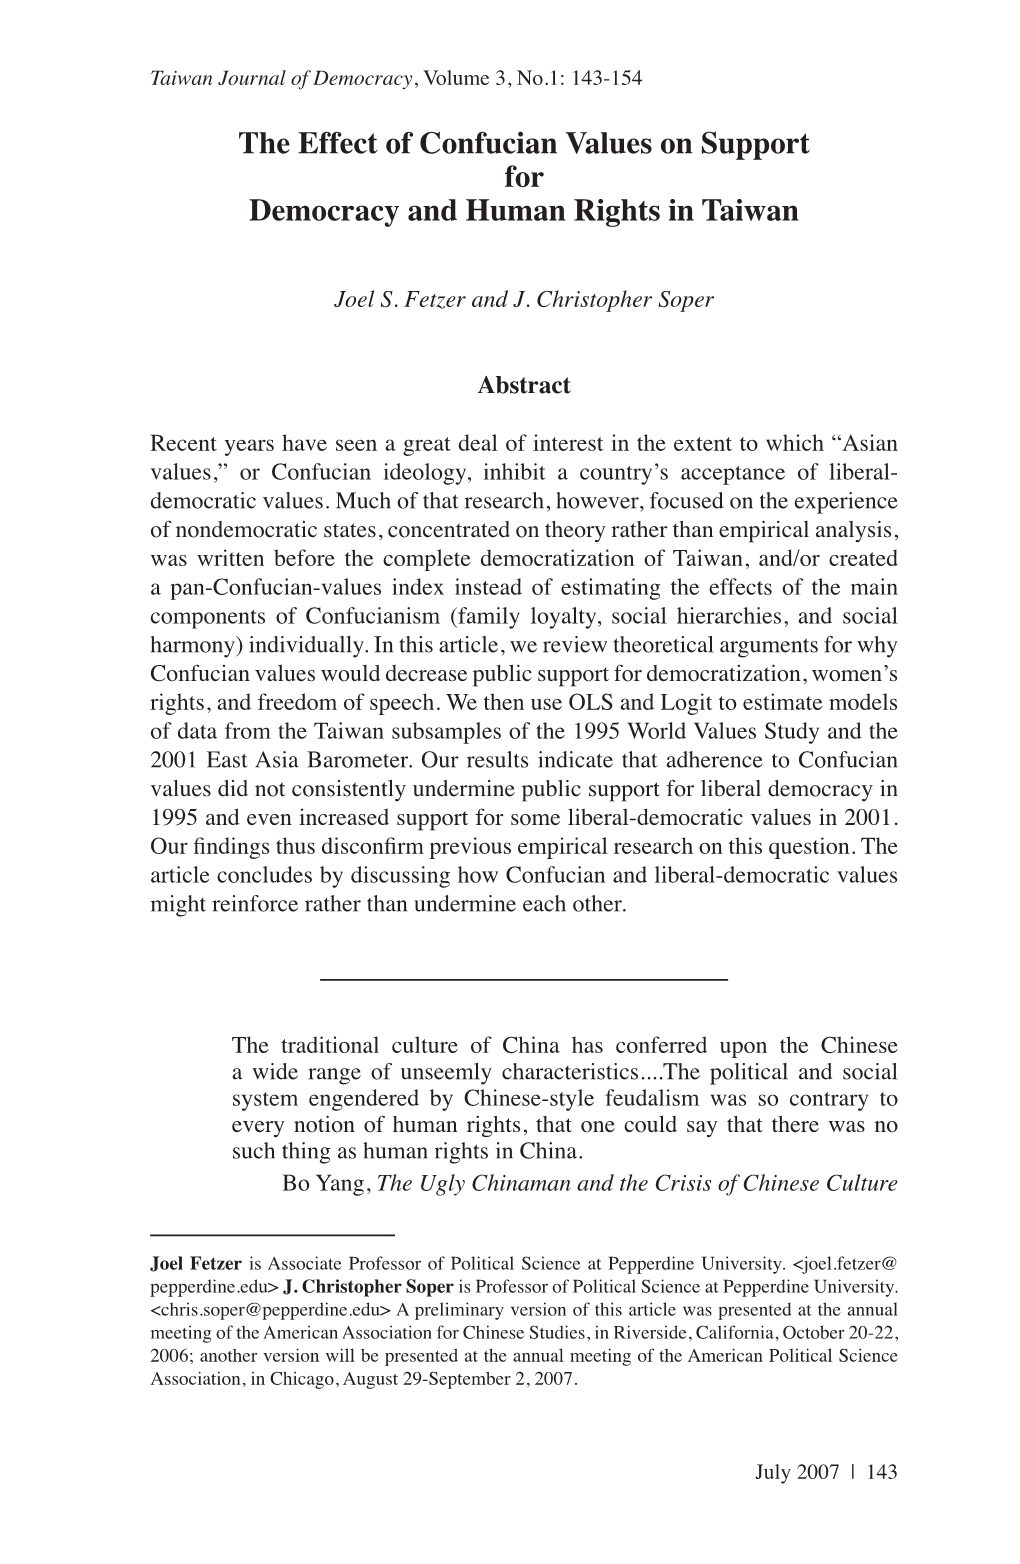 The Effect of Confucian Values on Support for Democracy and Human Rights in Taiwan